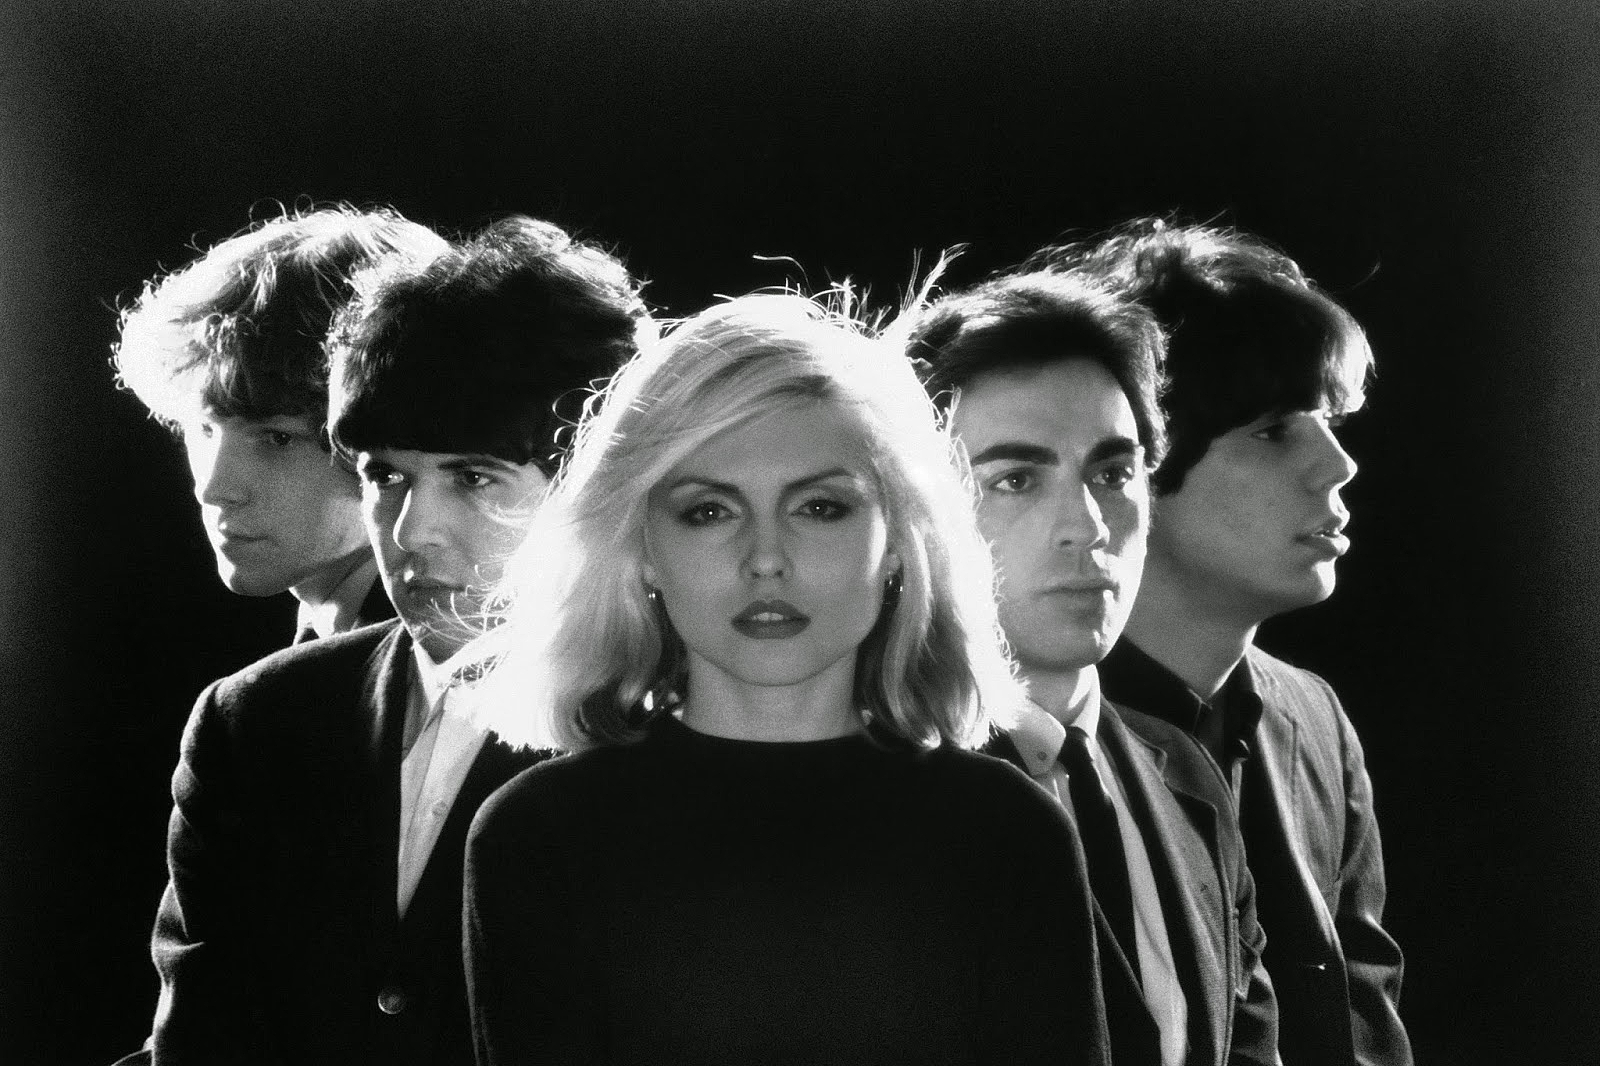 Blondie’s new album sounds like a laugh